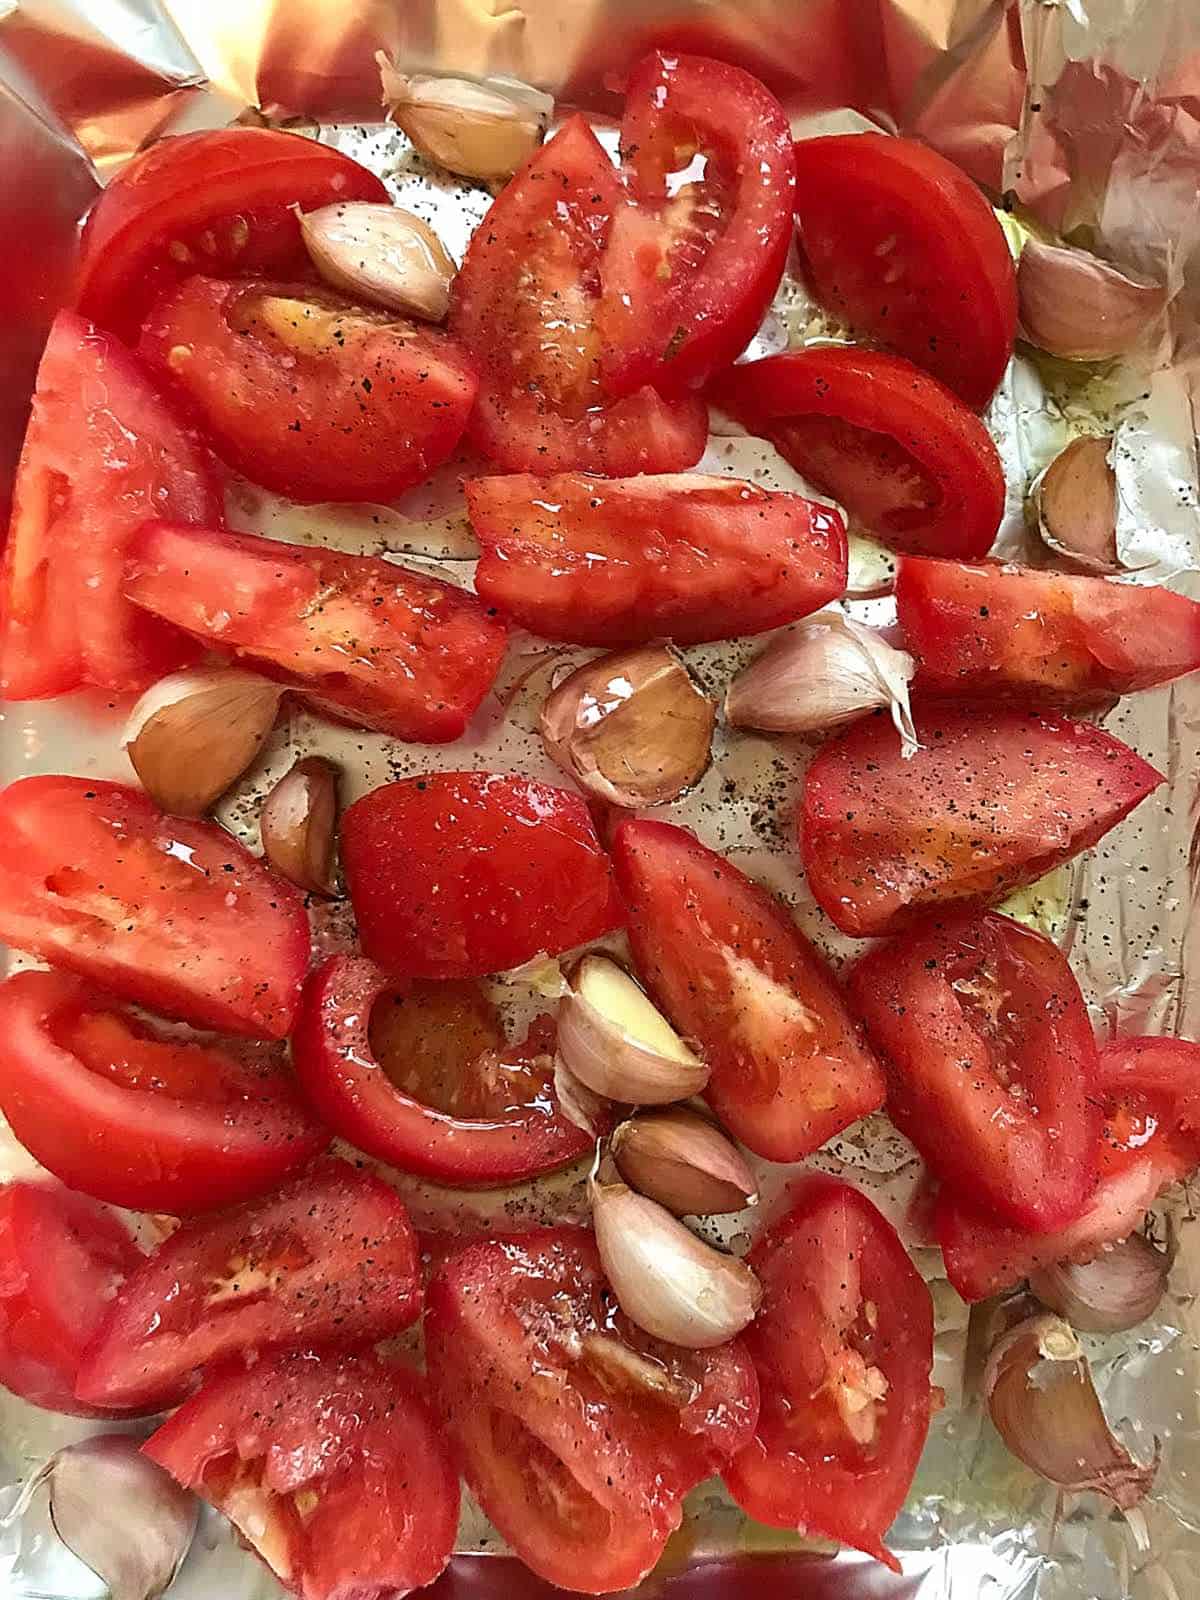 Pieces of tomatoes, red peppers, and garlic cloves on aluminum paper. 